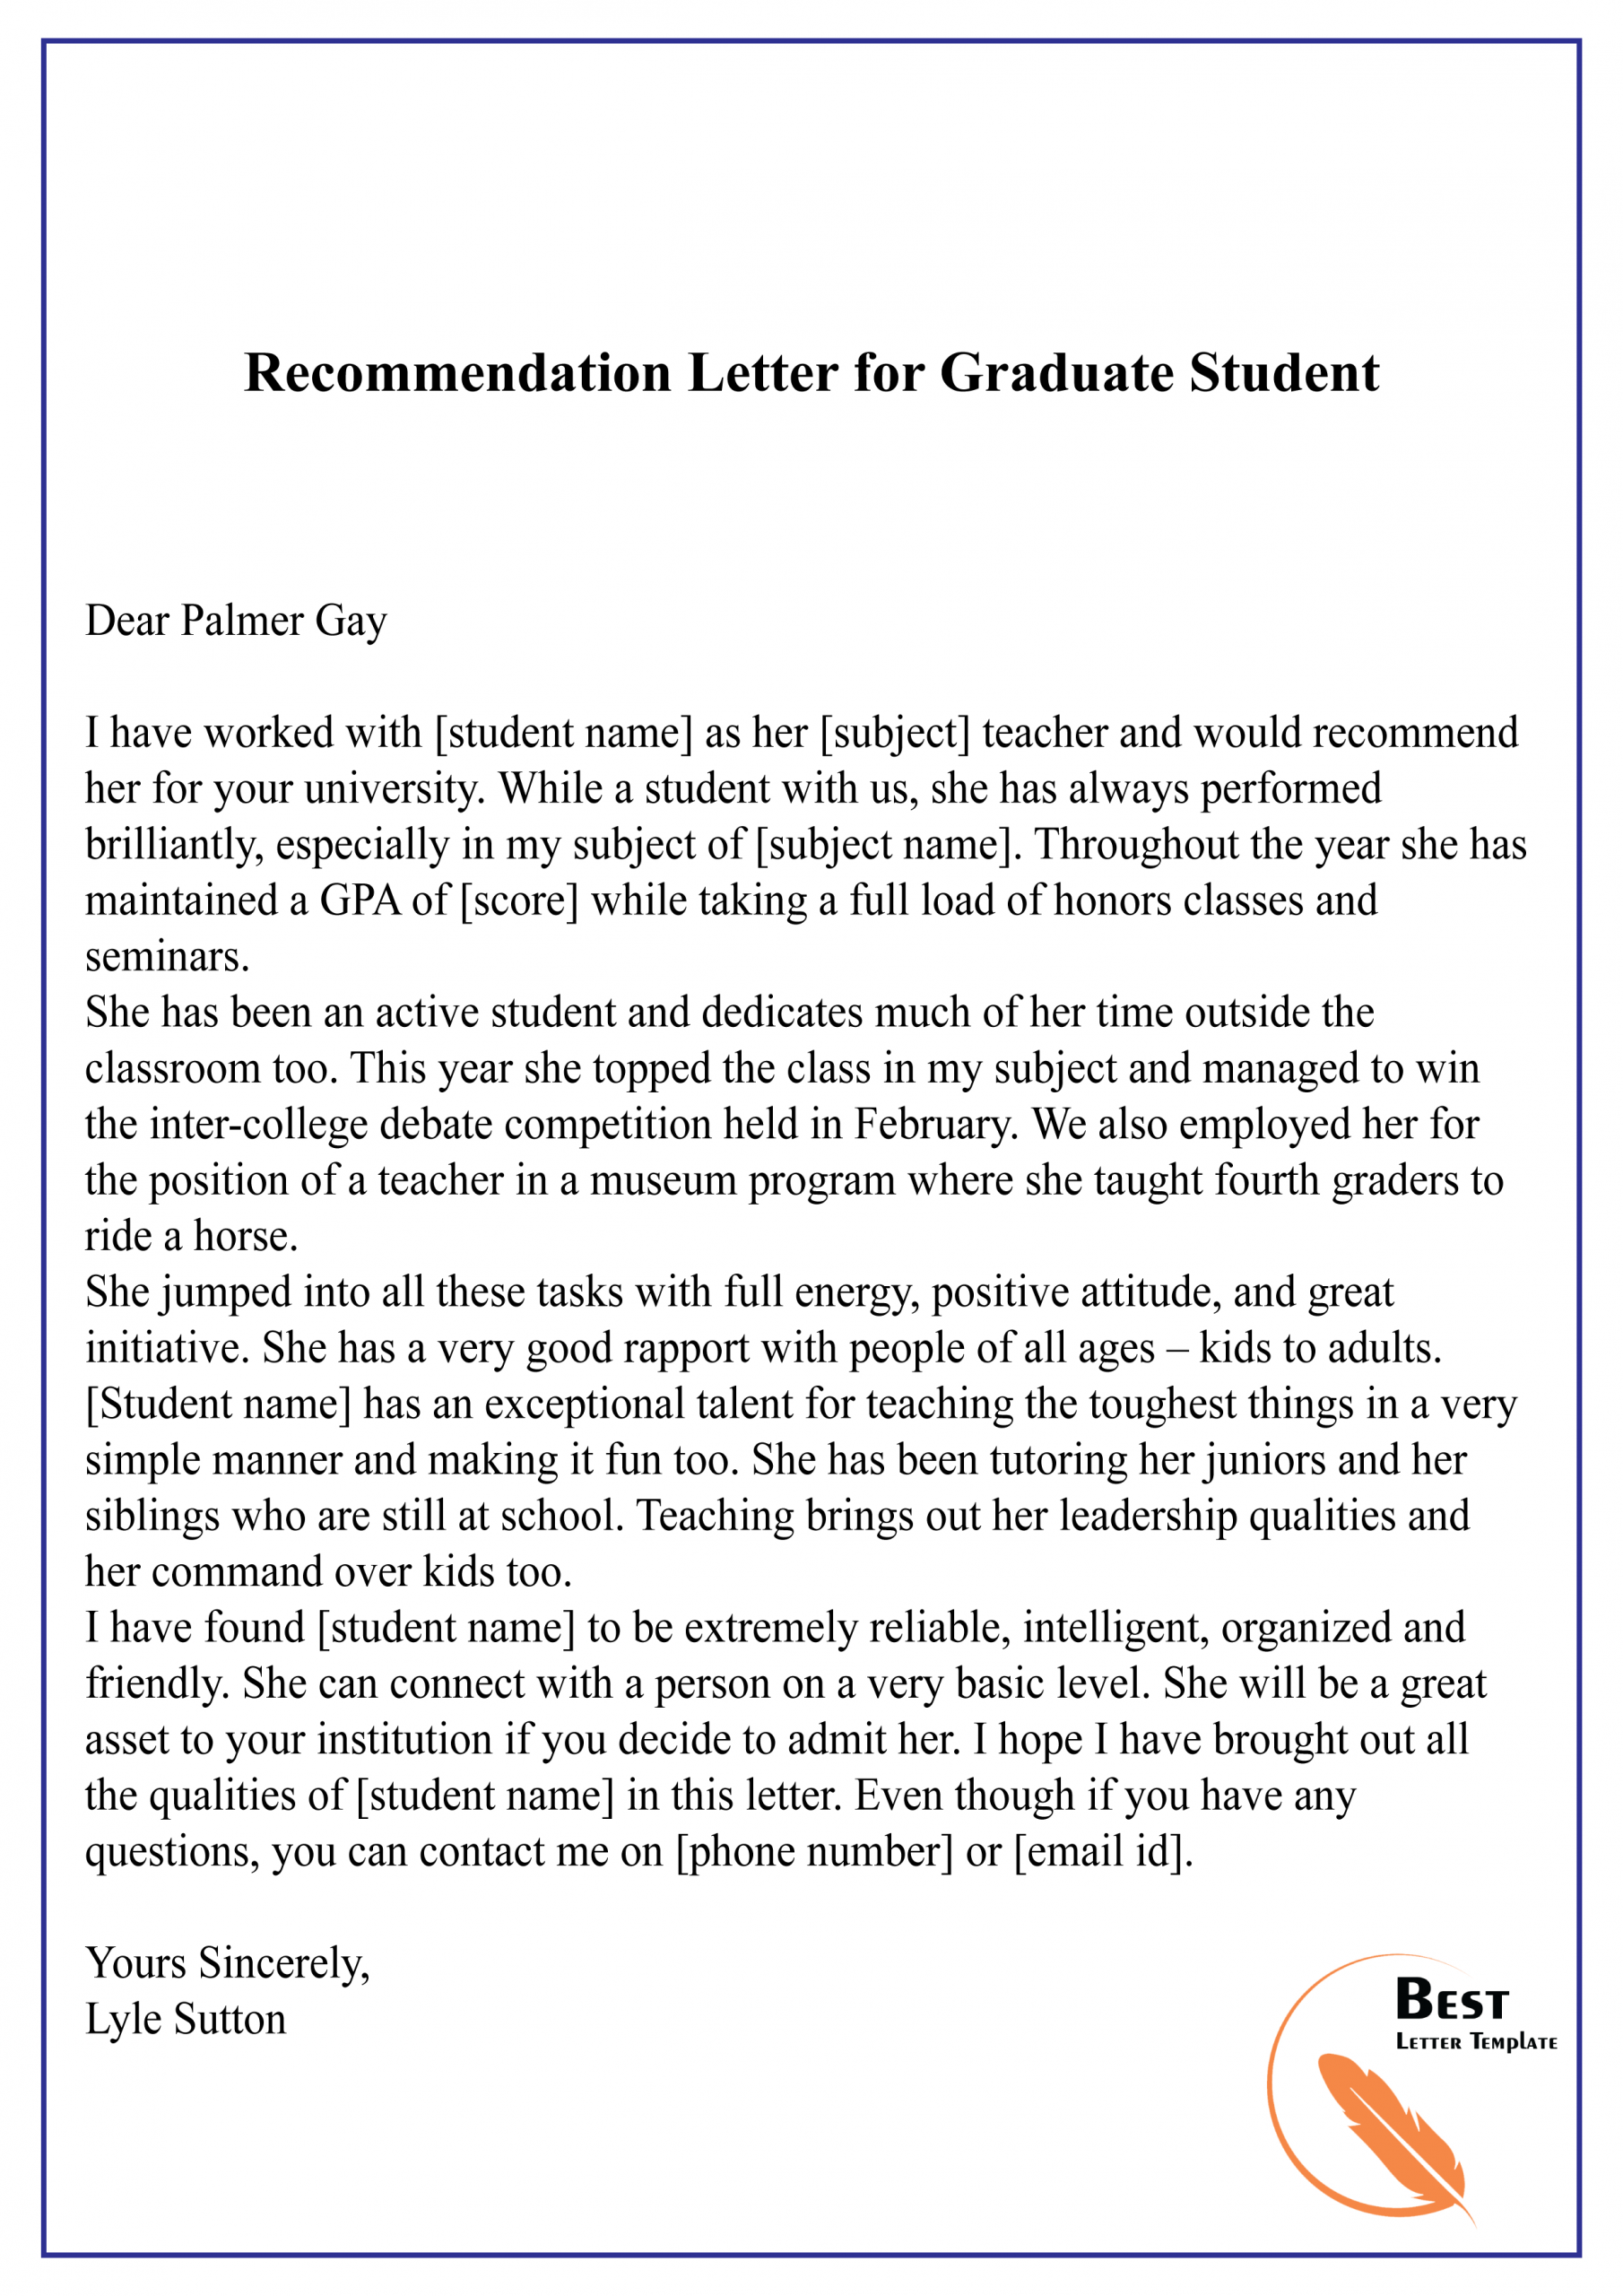 sample letter of recommendation for phd student